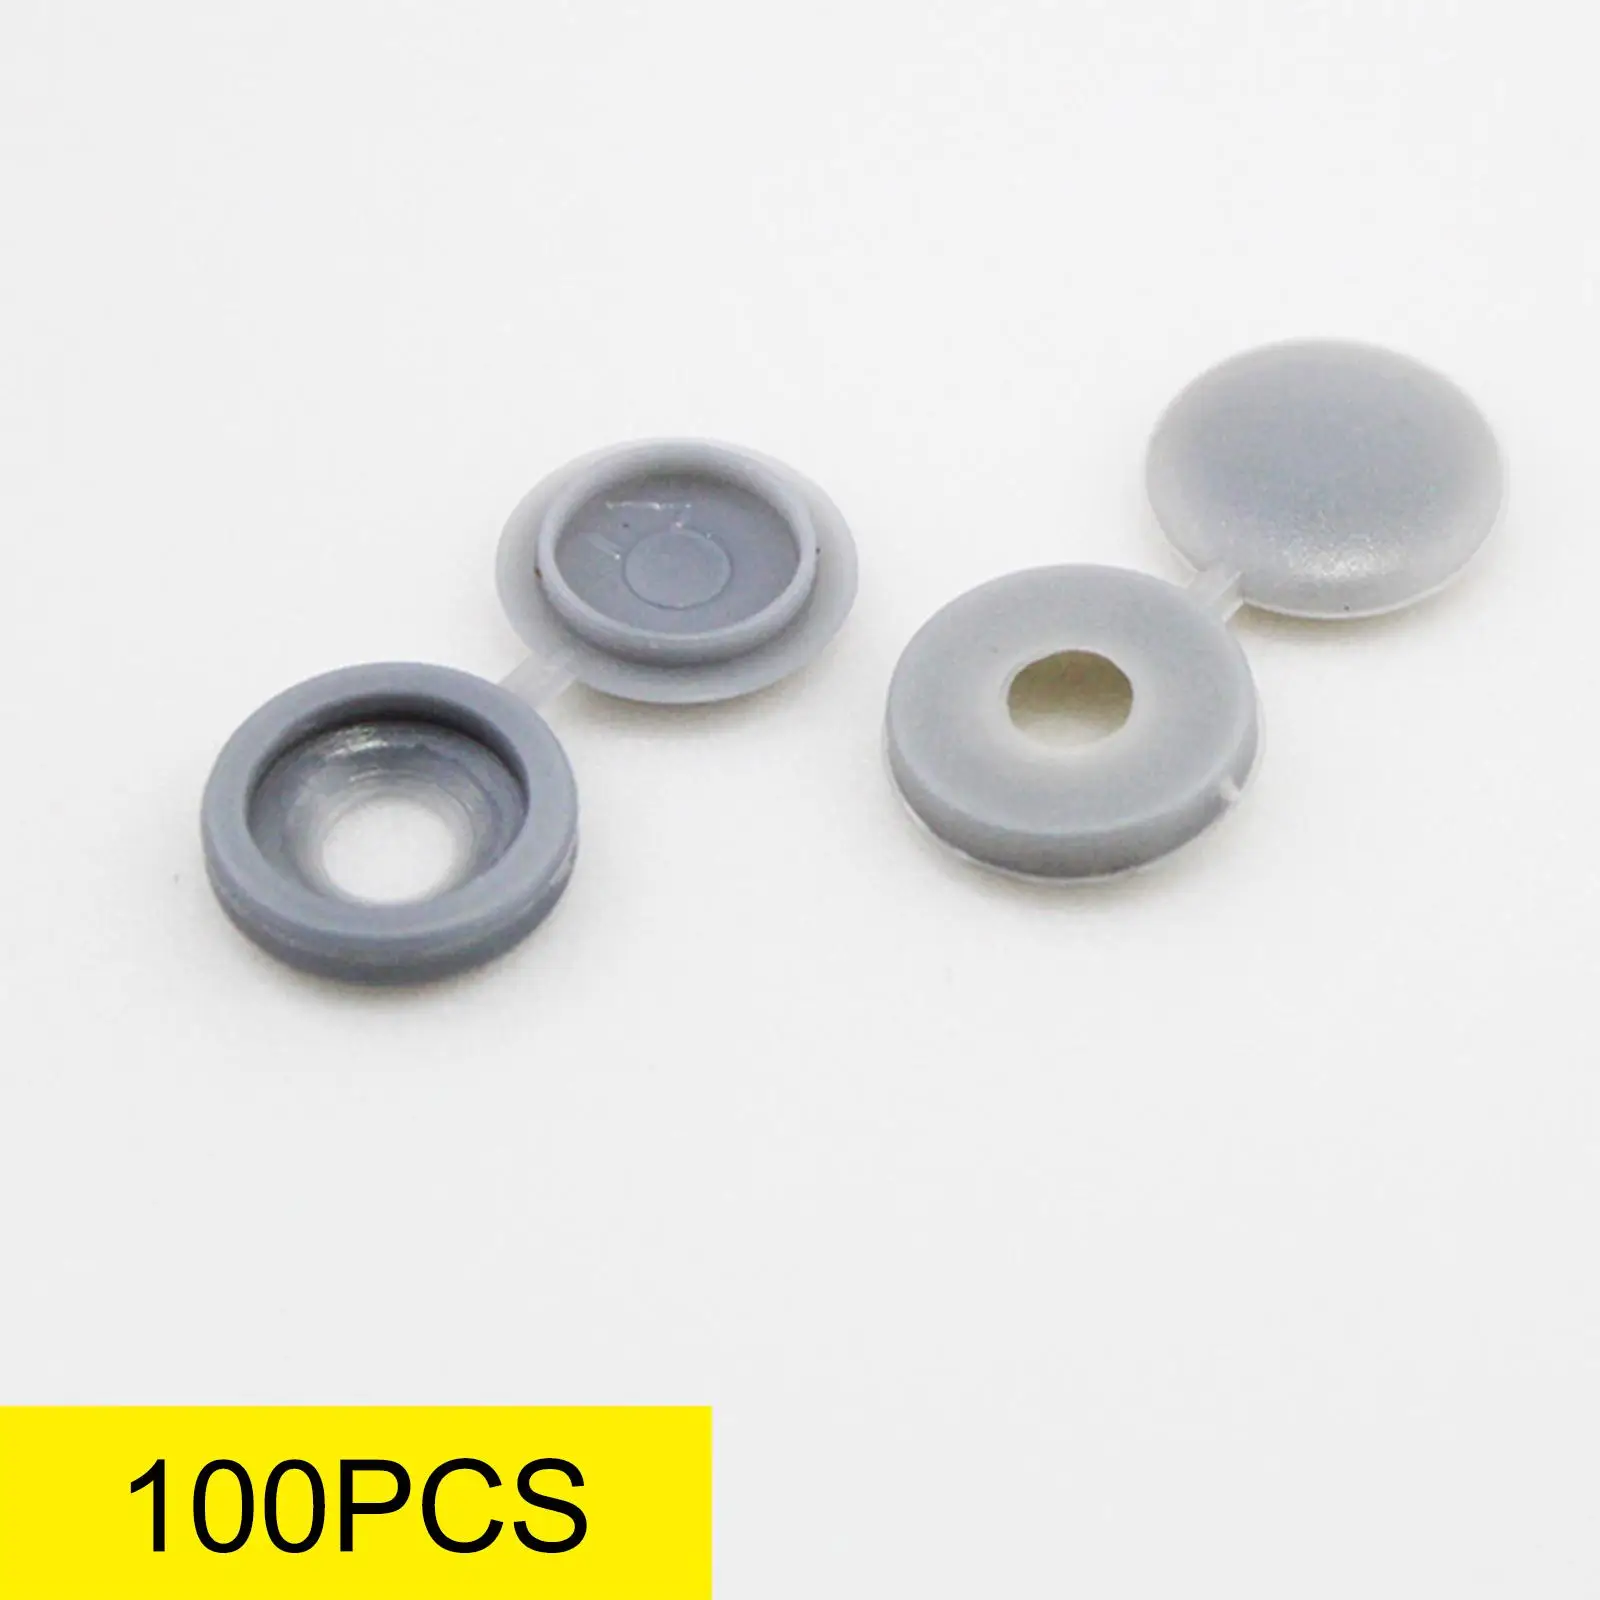 100 Pieces Premium Screw Covers Screws Caps Portable Wear Resistant Decorative Soft for Replacement Tools Cabinet Yard Furniture